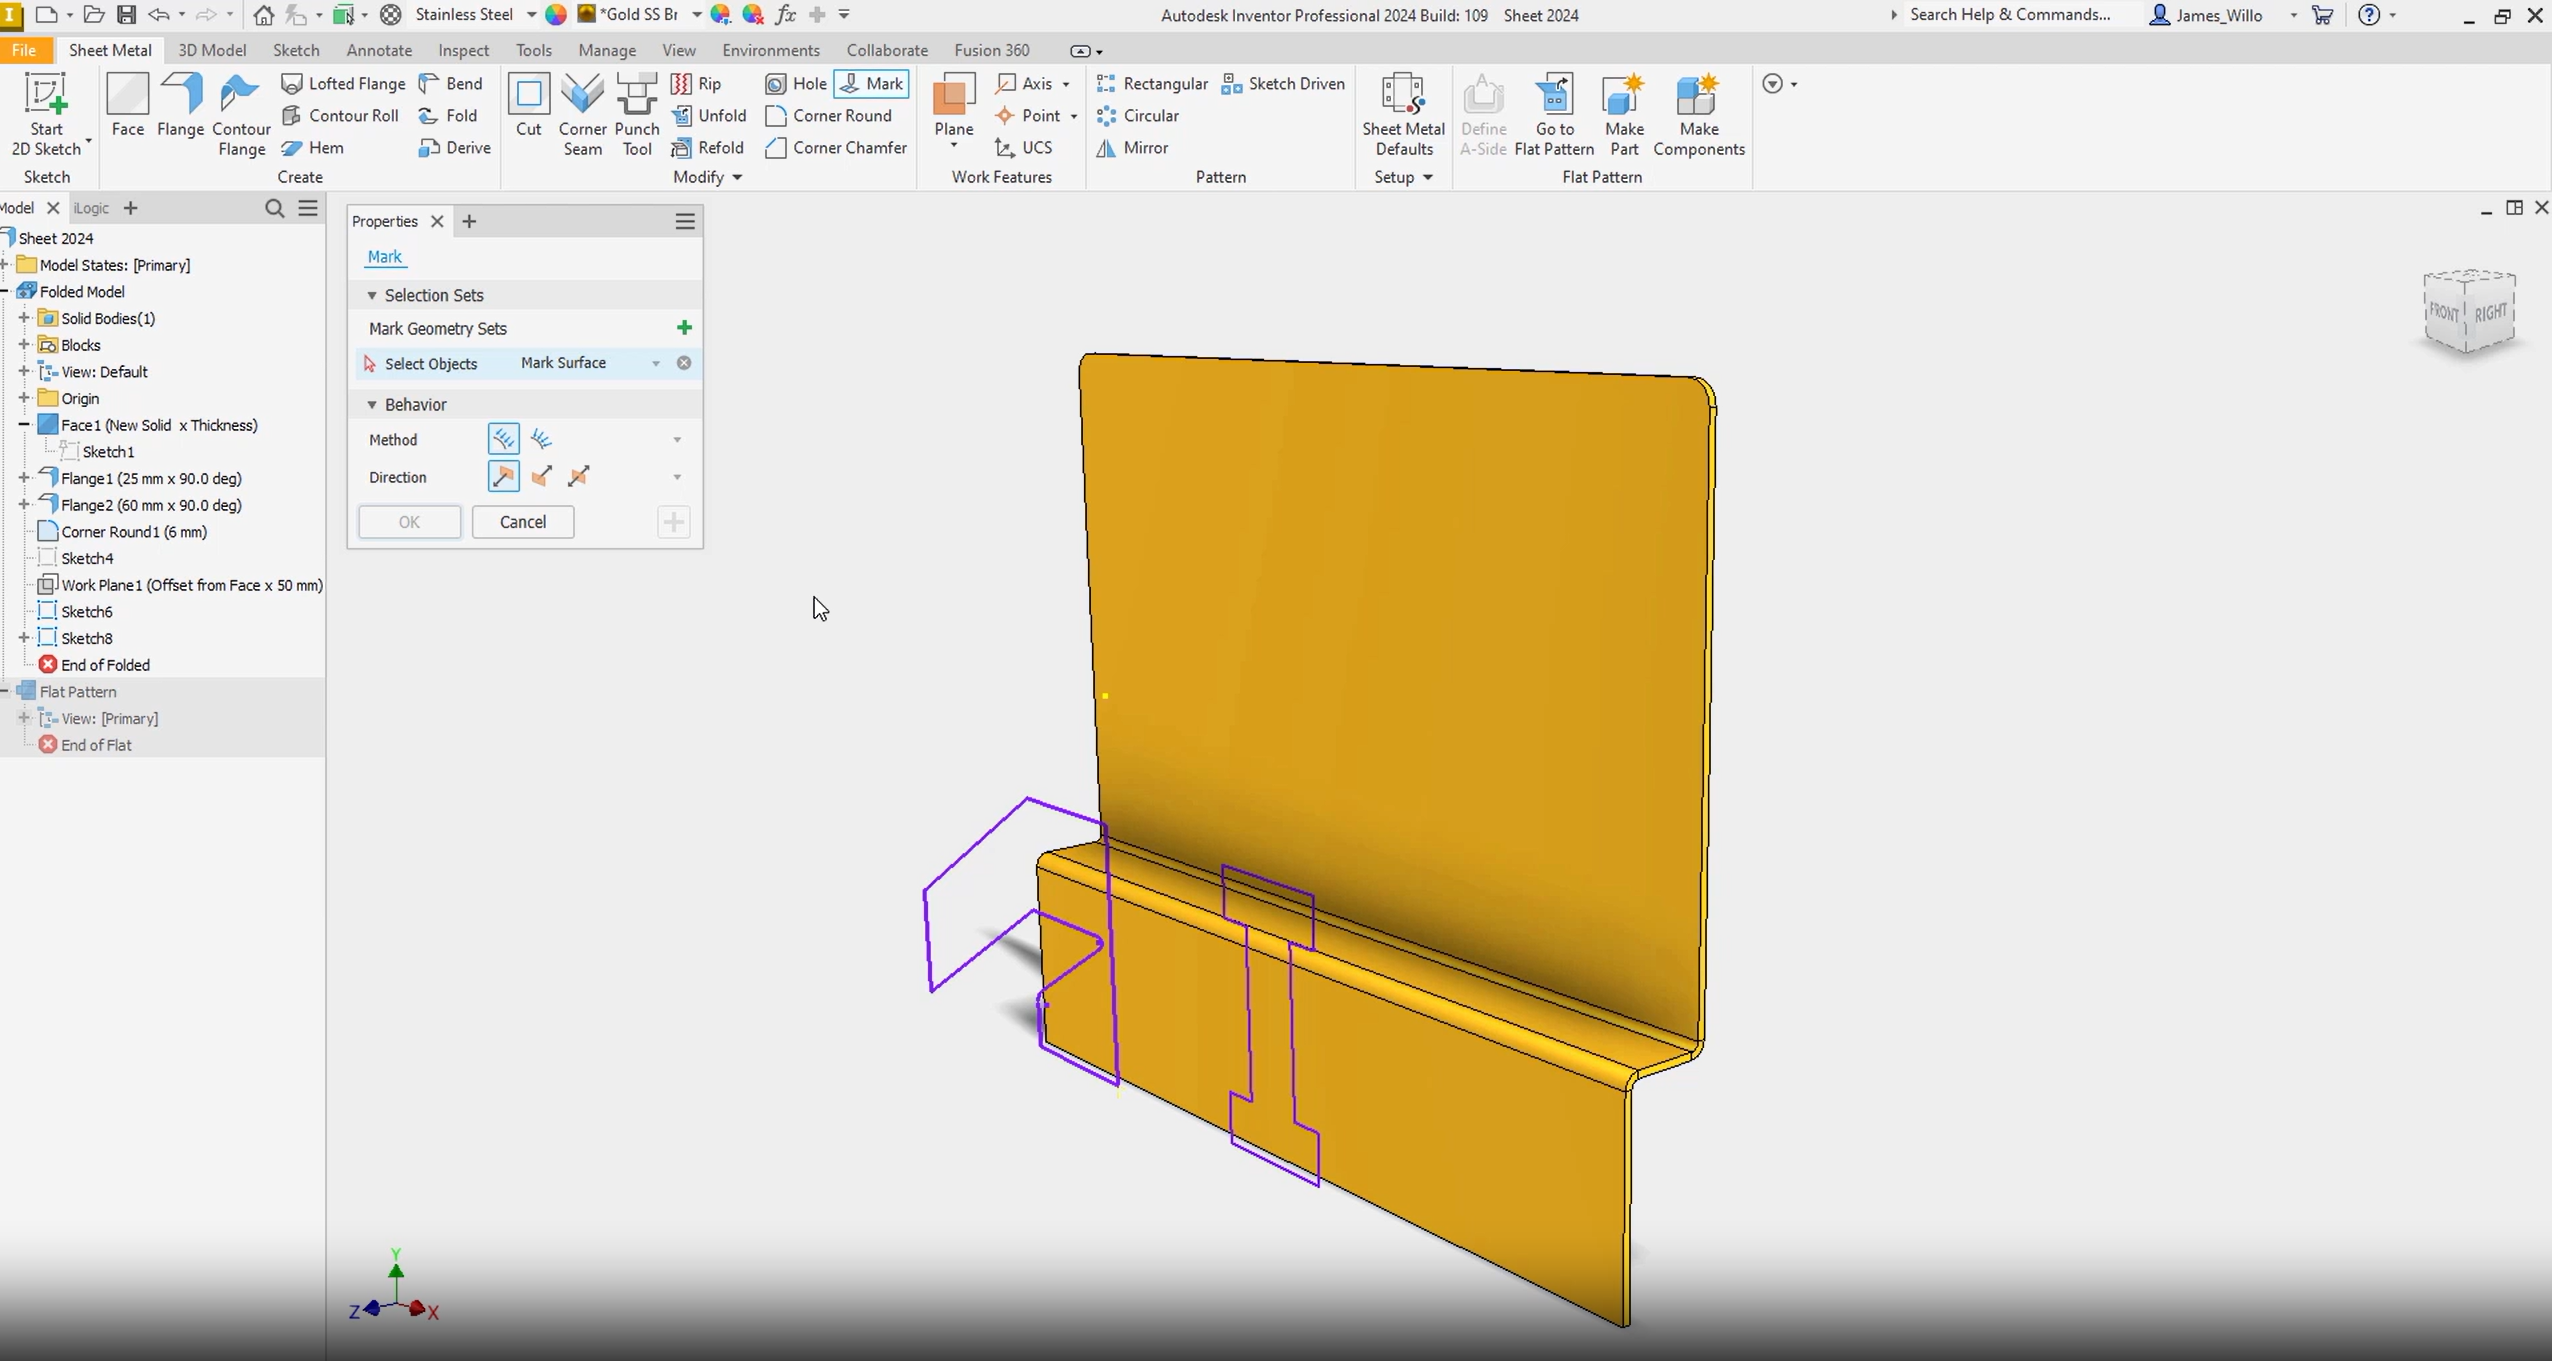 What's new in Autodesk Inventor Professional 2024 - Cadac Group